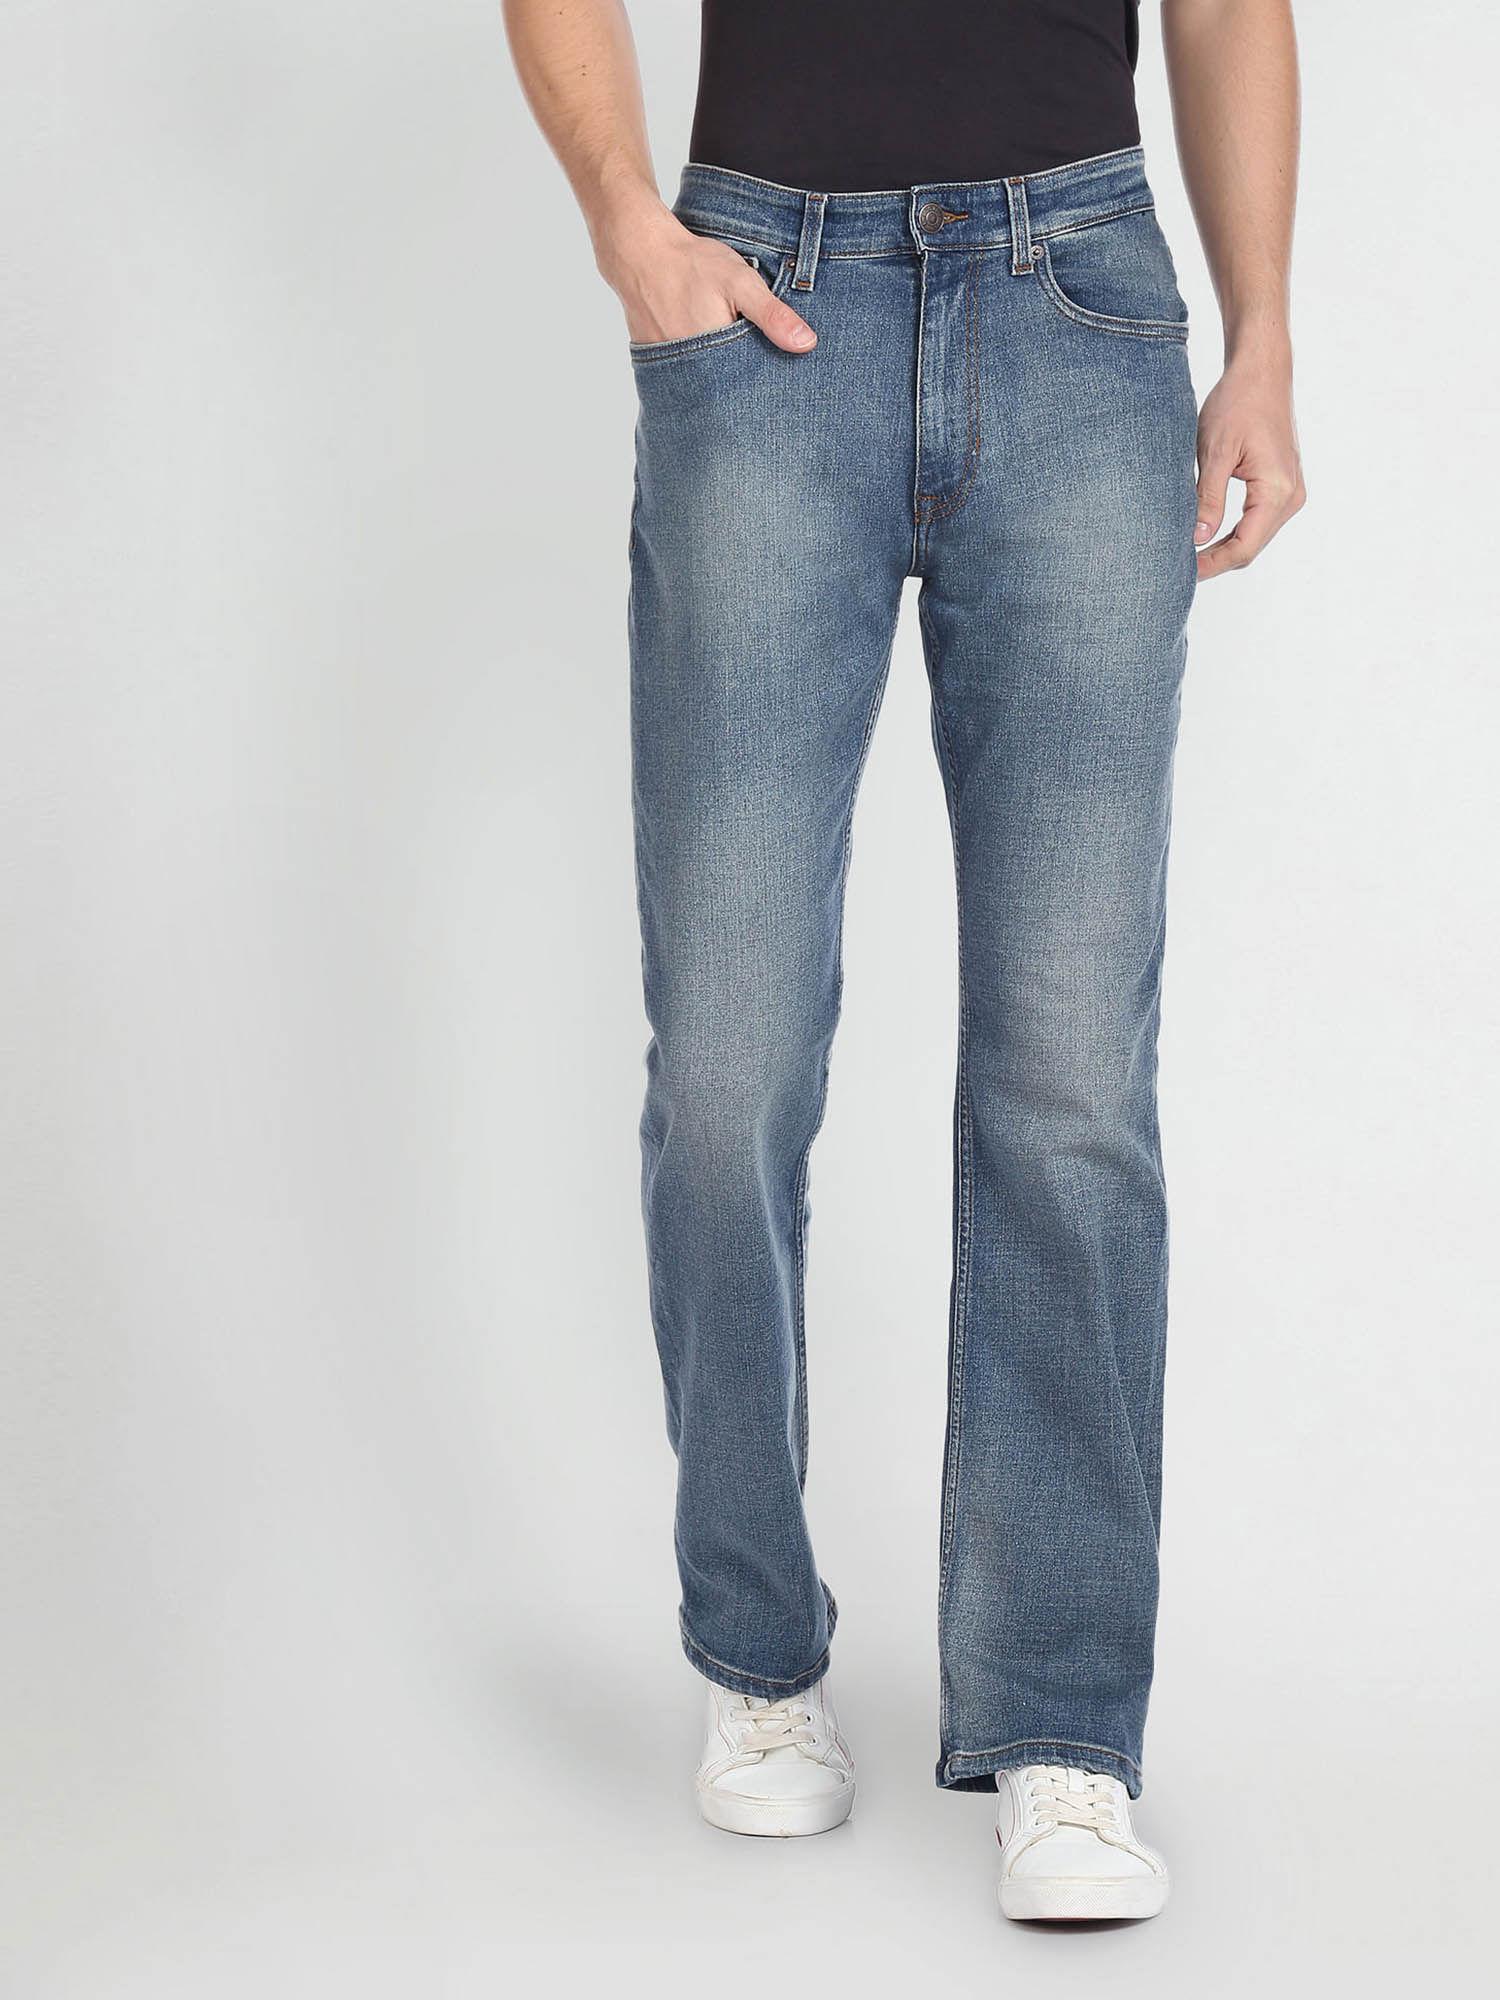 stone wash connor bootcut jeans